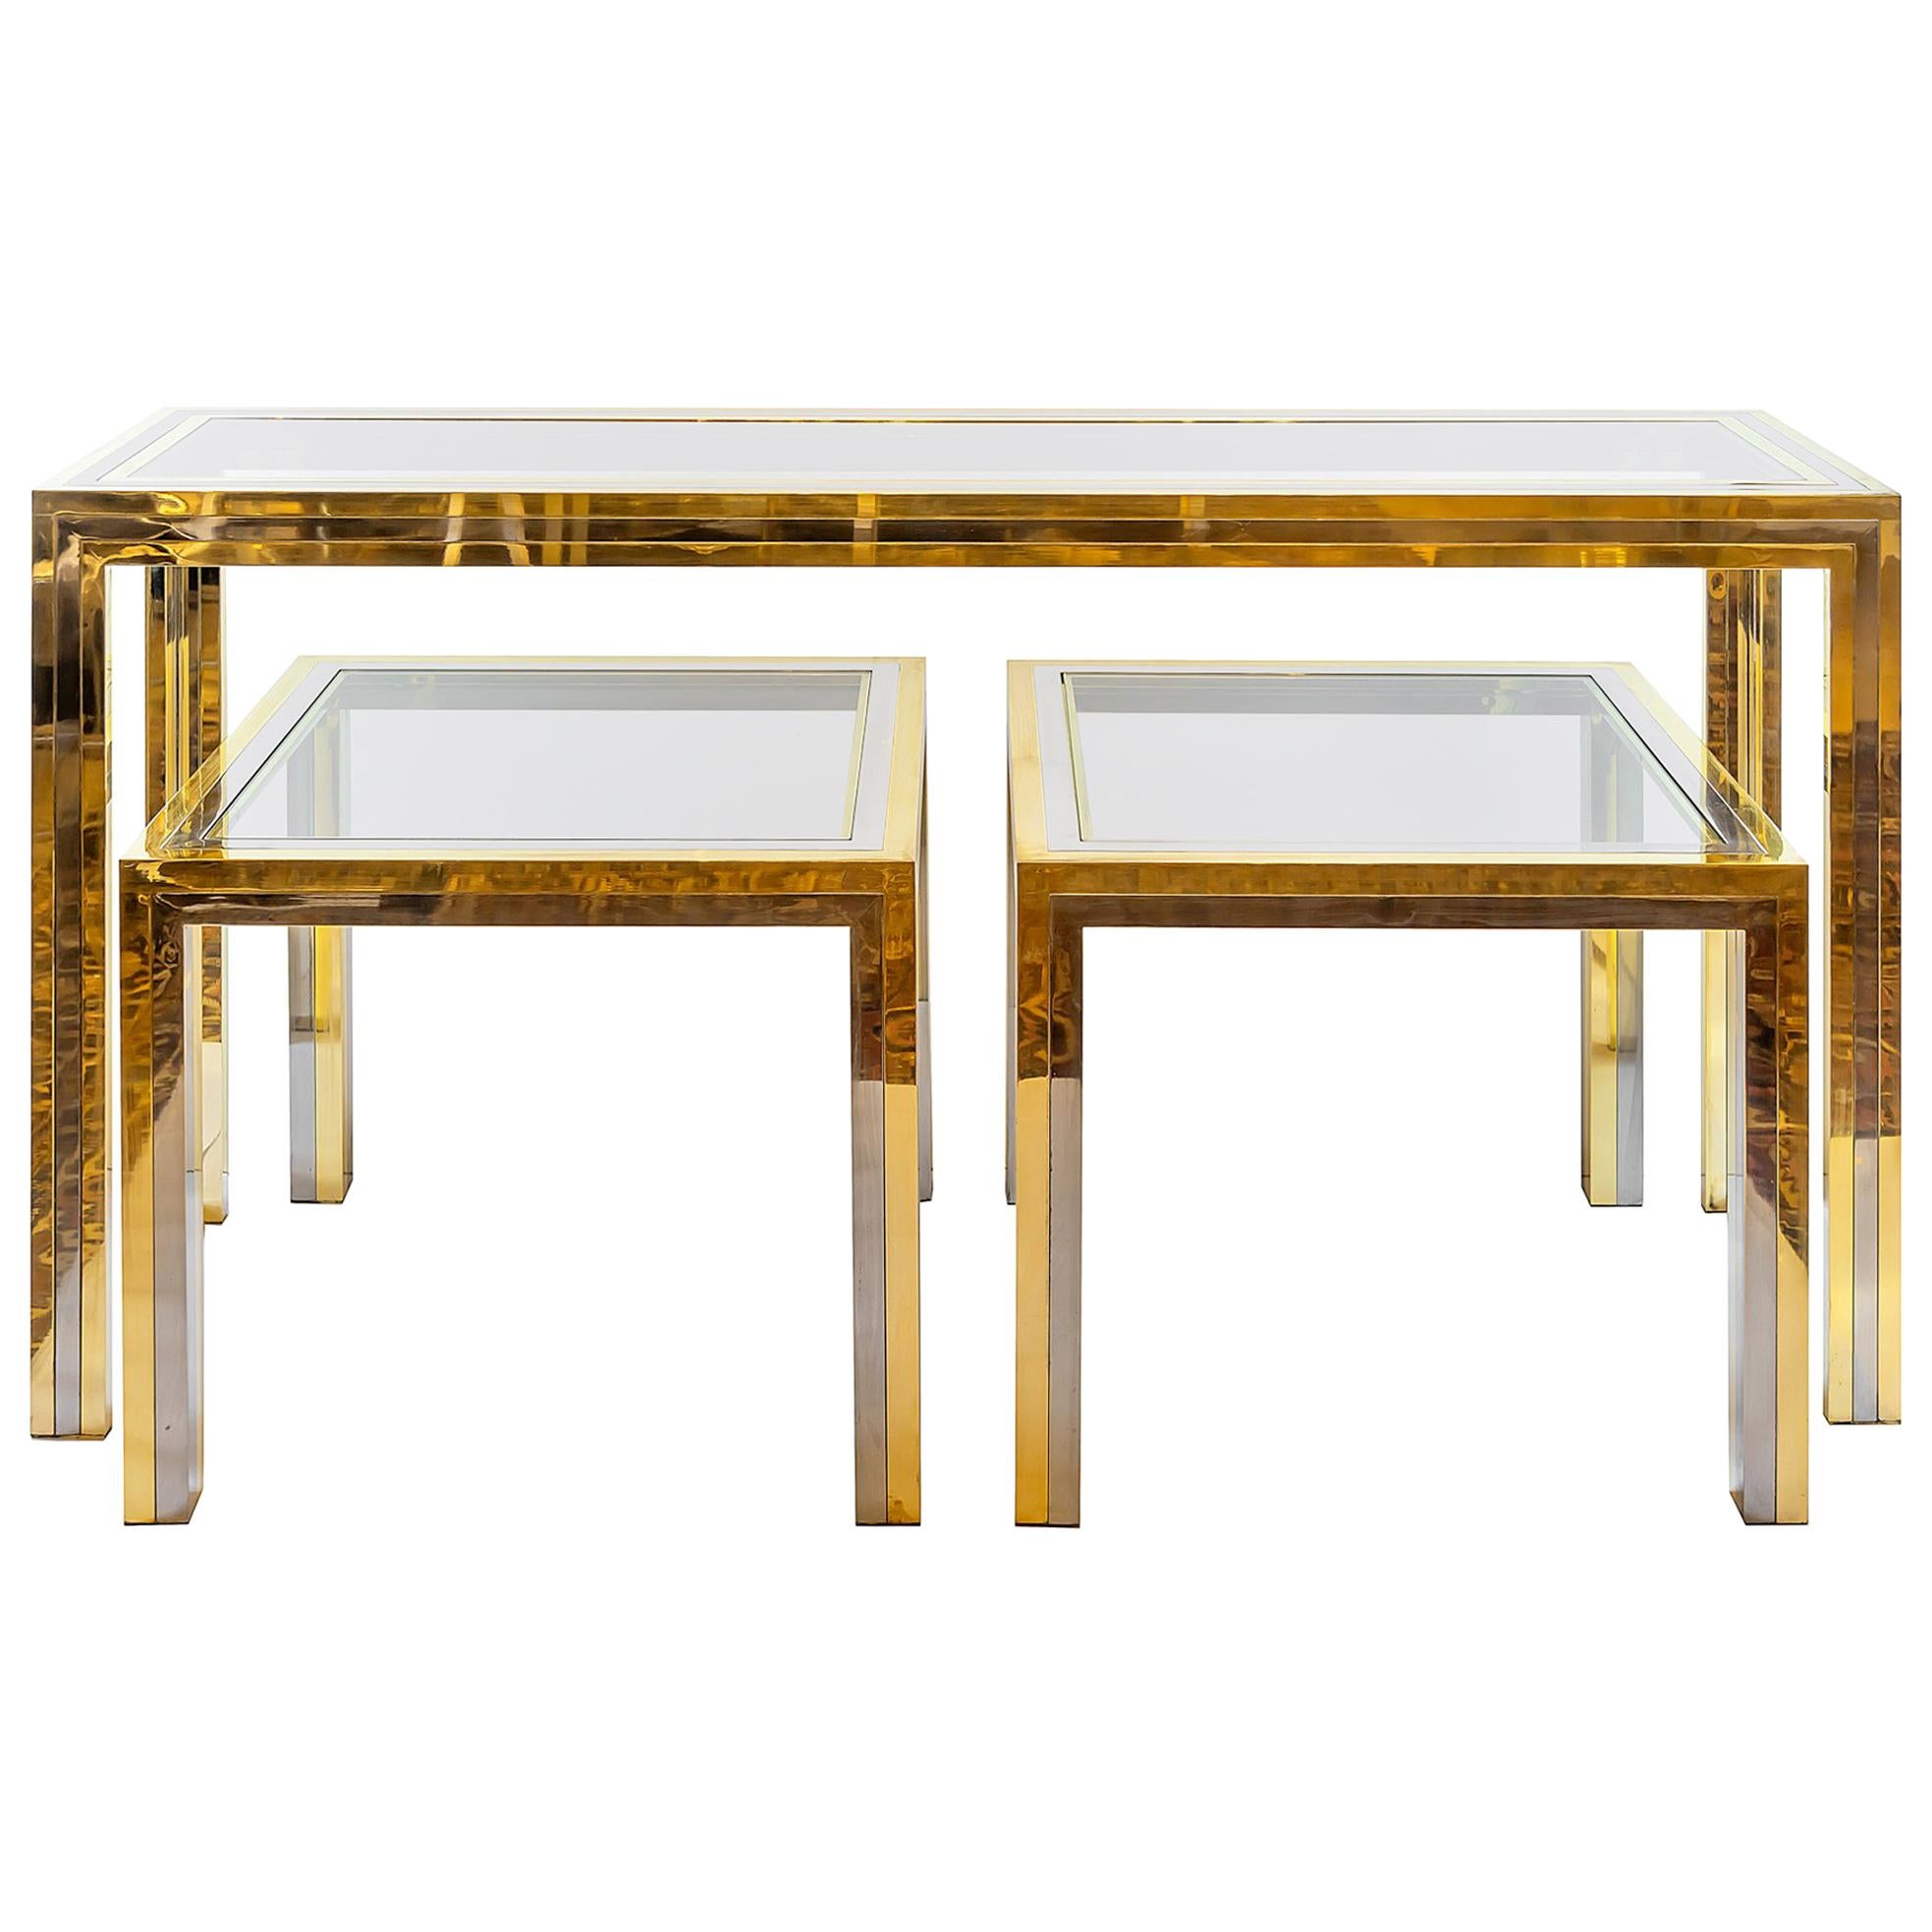 Set of Midcentury Italian Brass and Chrome Console and Side Tables by Romeo Rega